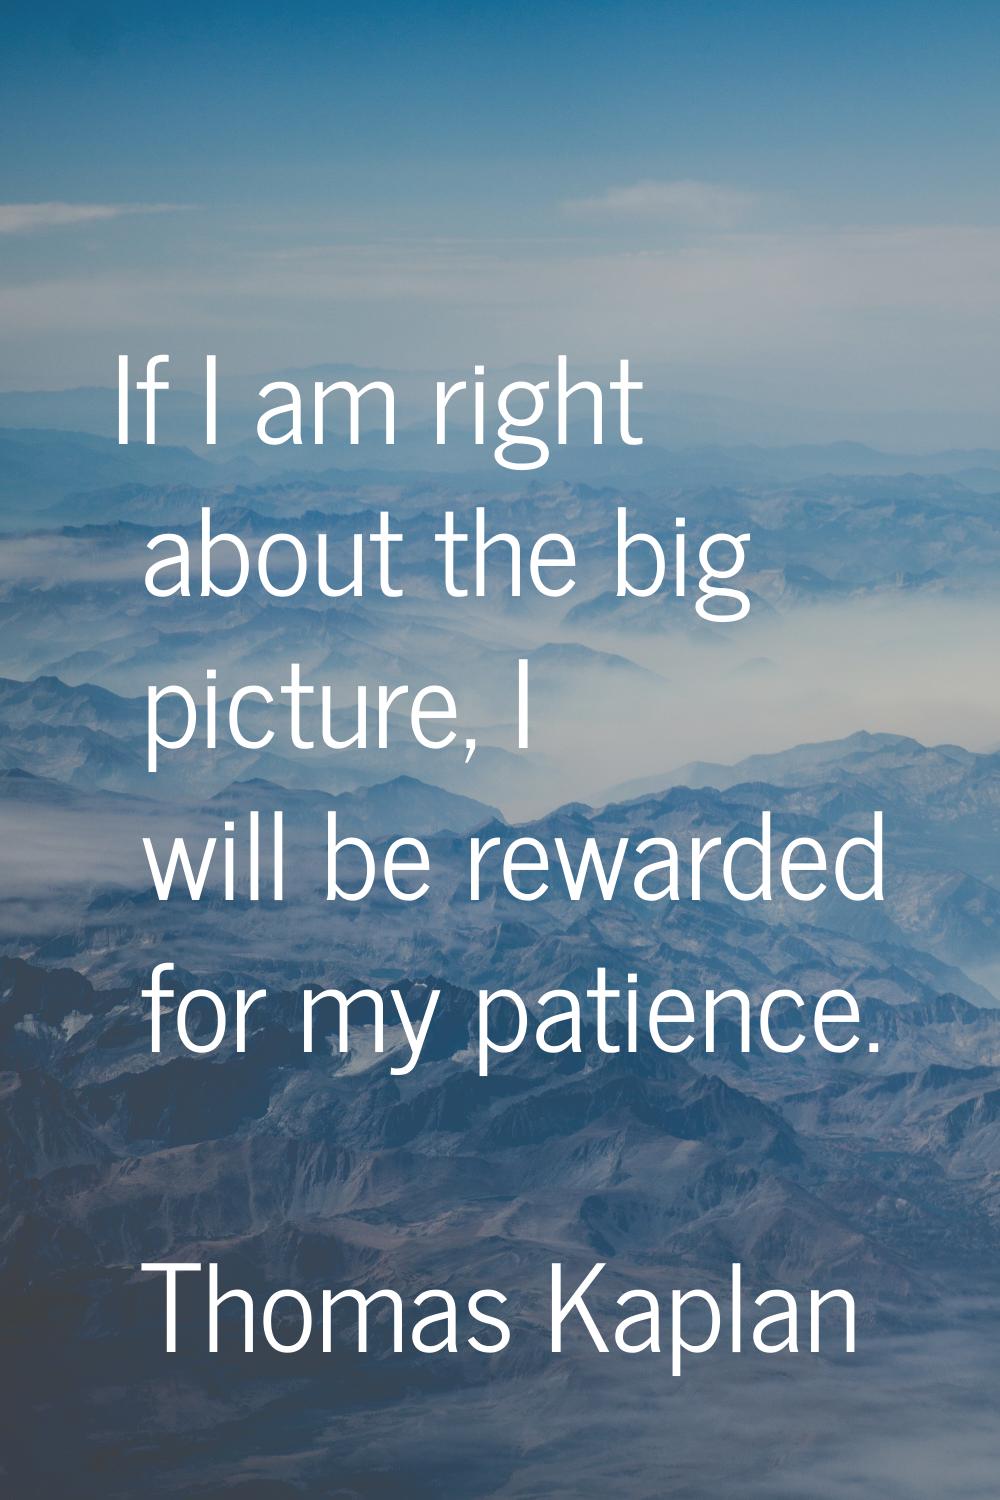 If I am right about the big picture, I will be rewarded for my patience.